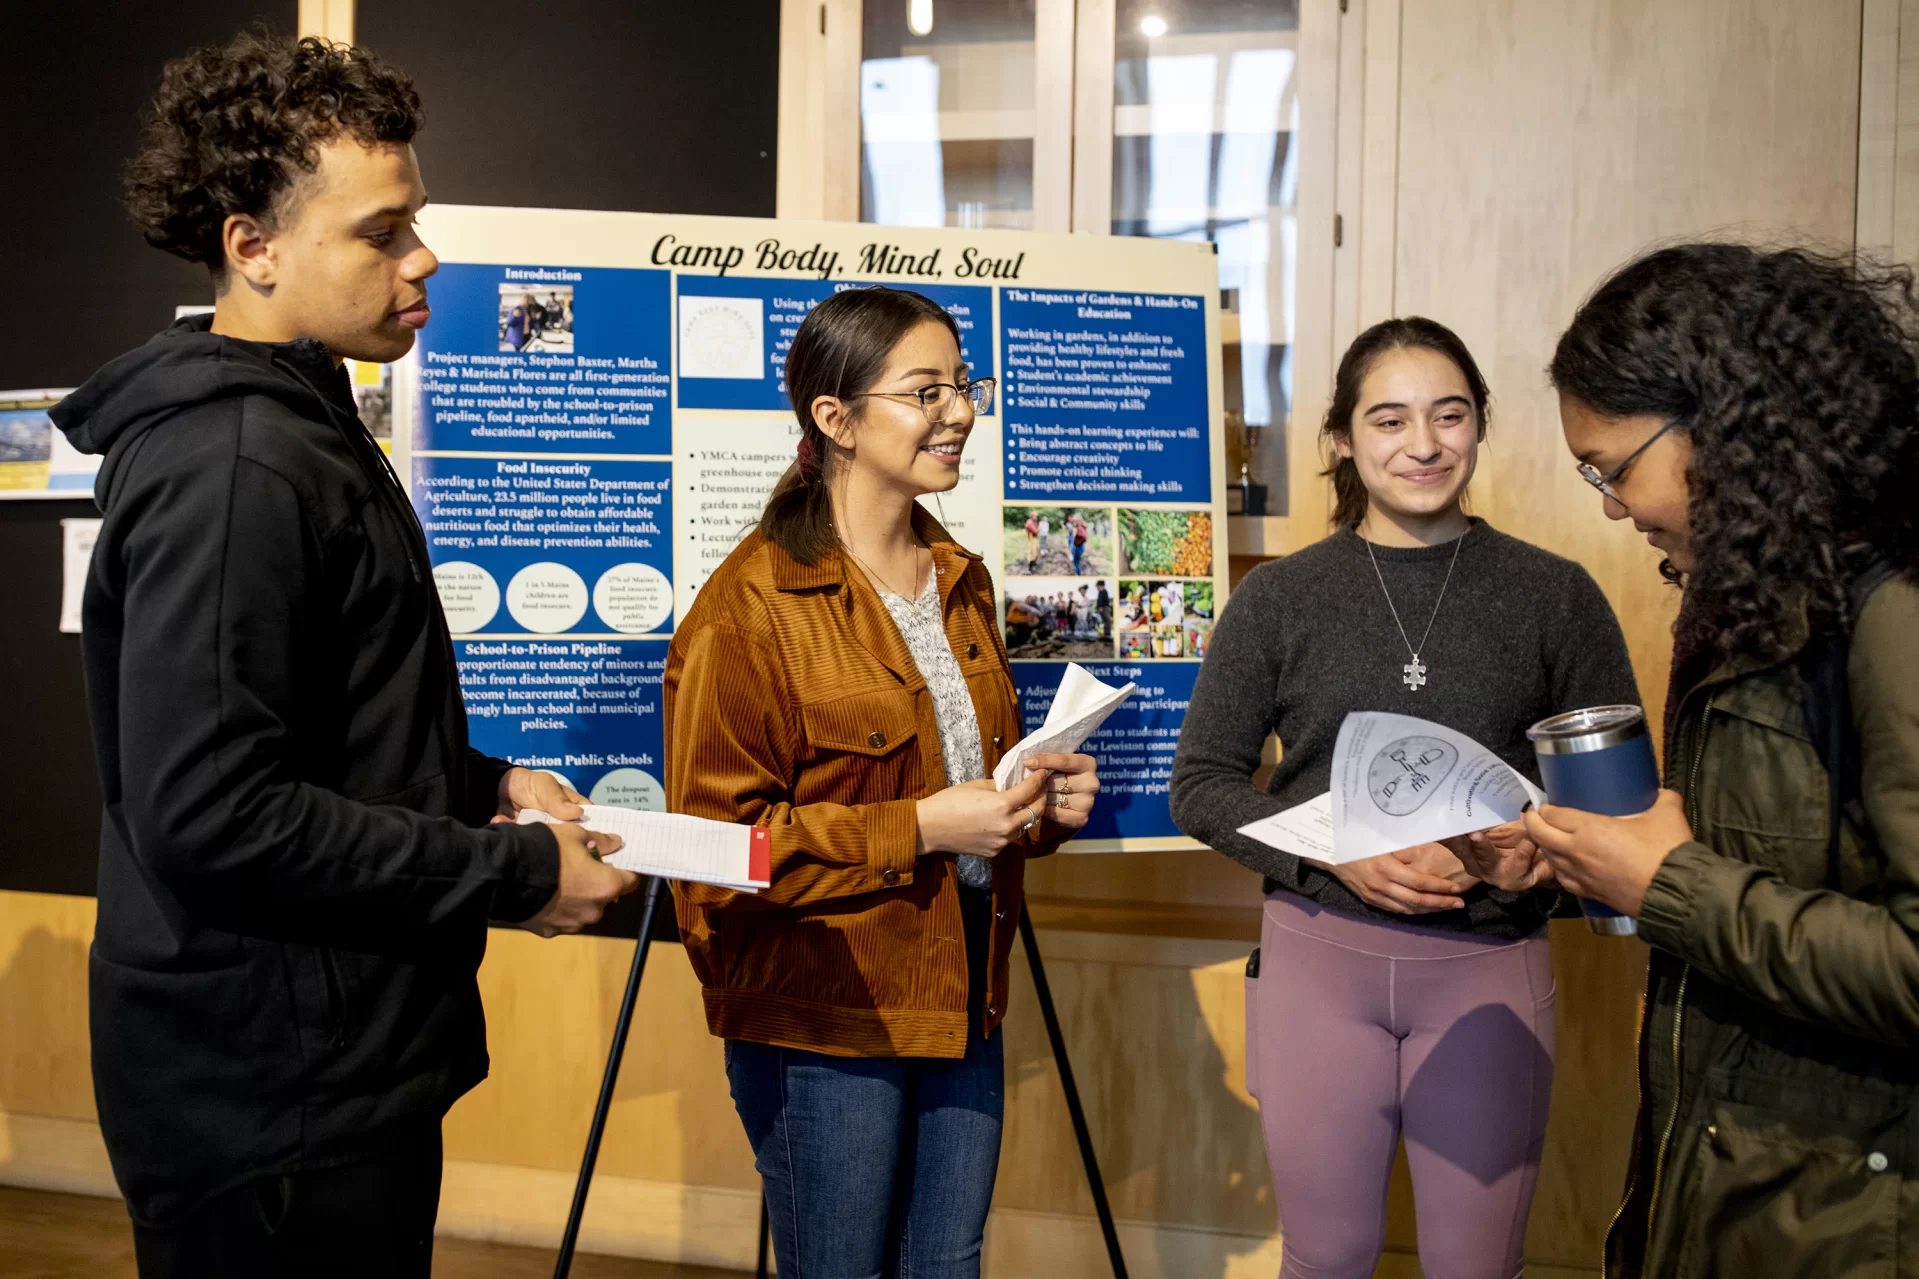 “I came to look and ask questions..— History major Ursula Rall ’20, right, attends an informal presentation by Stephon Baxter ‘23, Marisela Flores Pineda ’23, and Martha Reyes ‘23